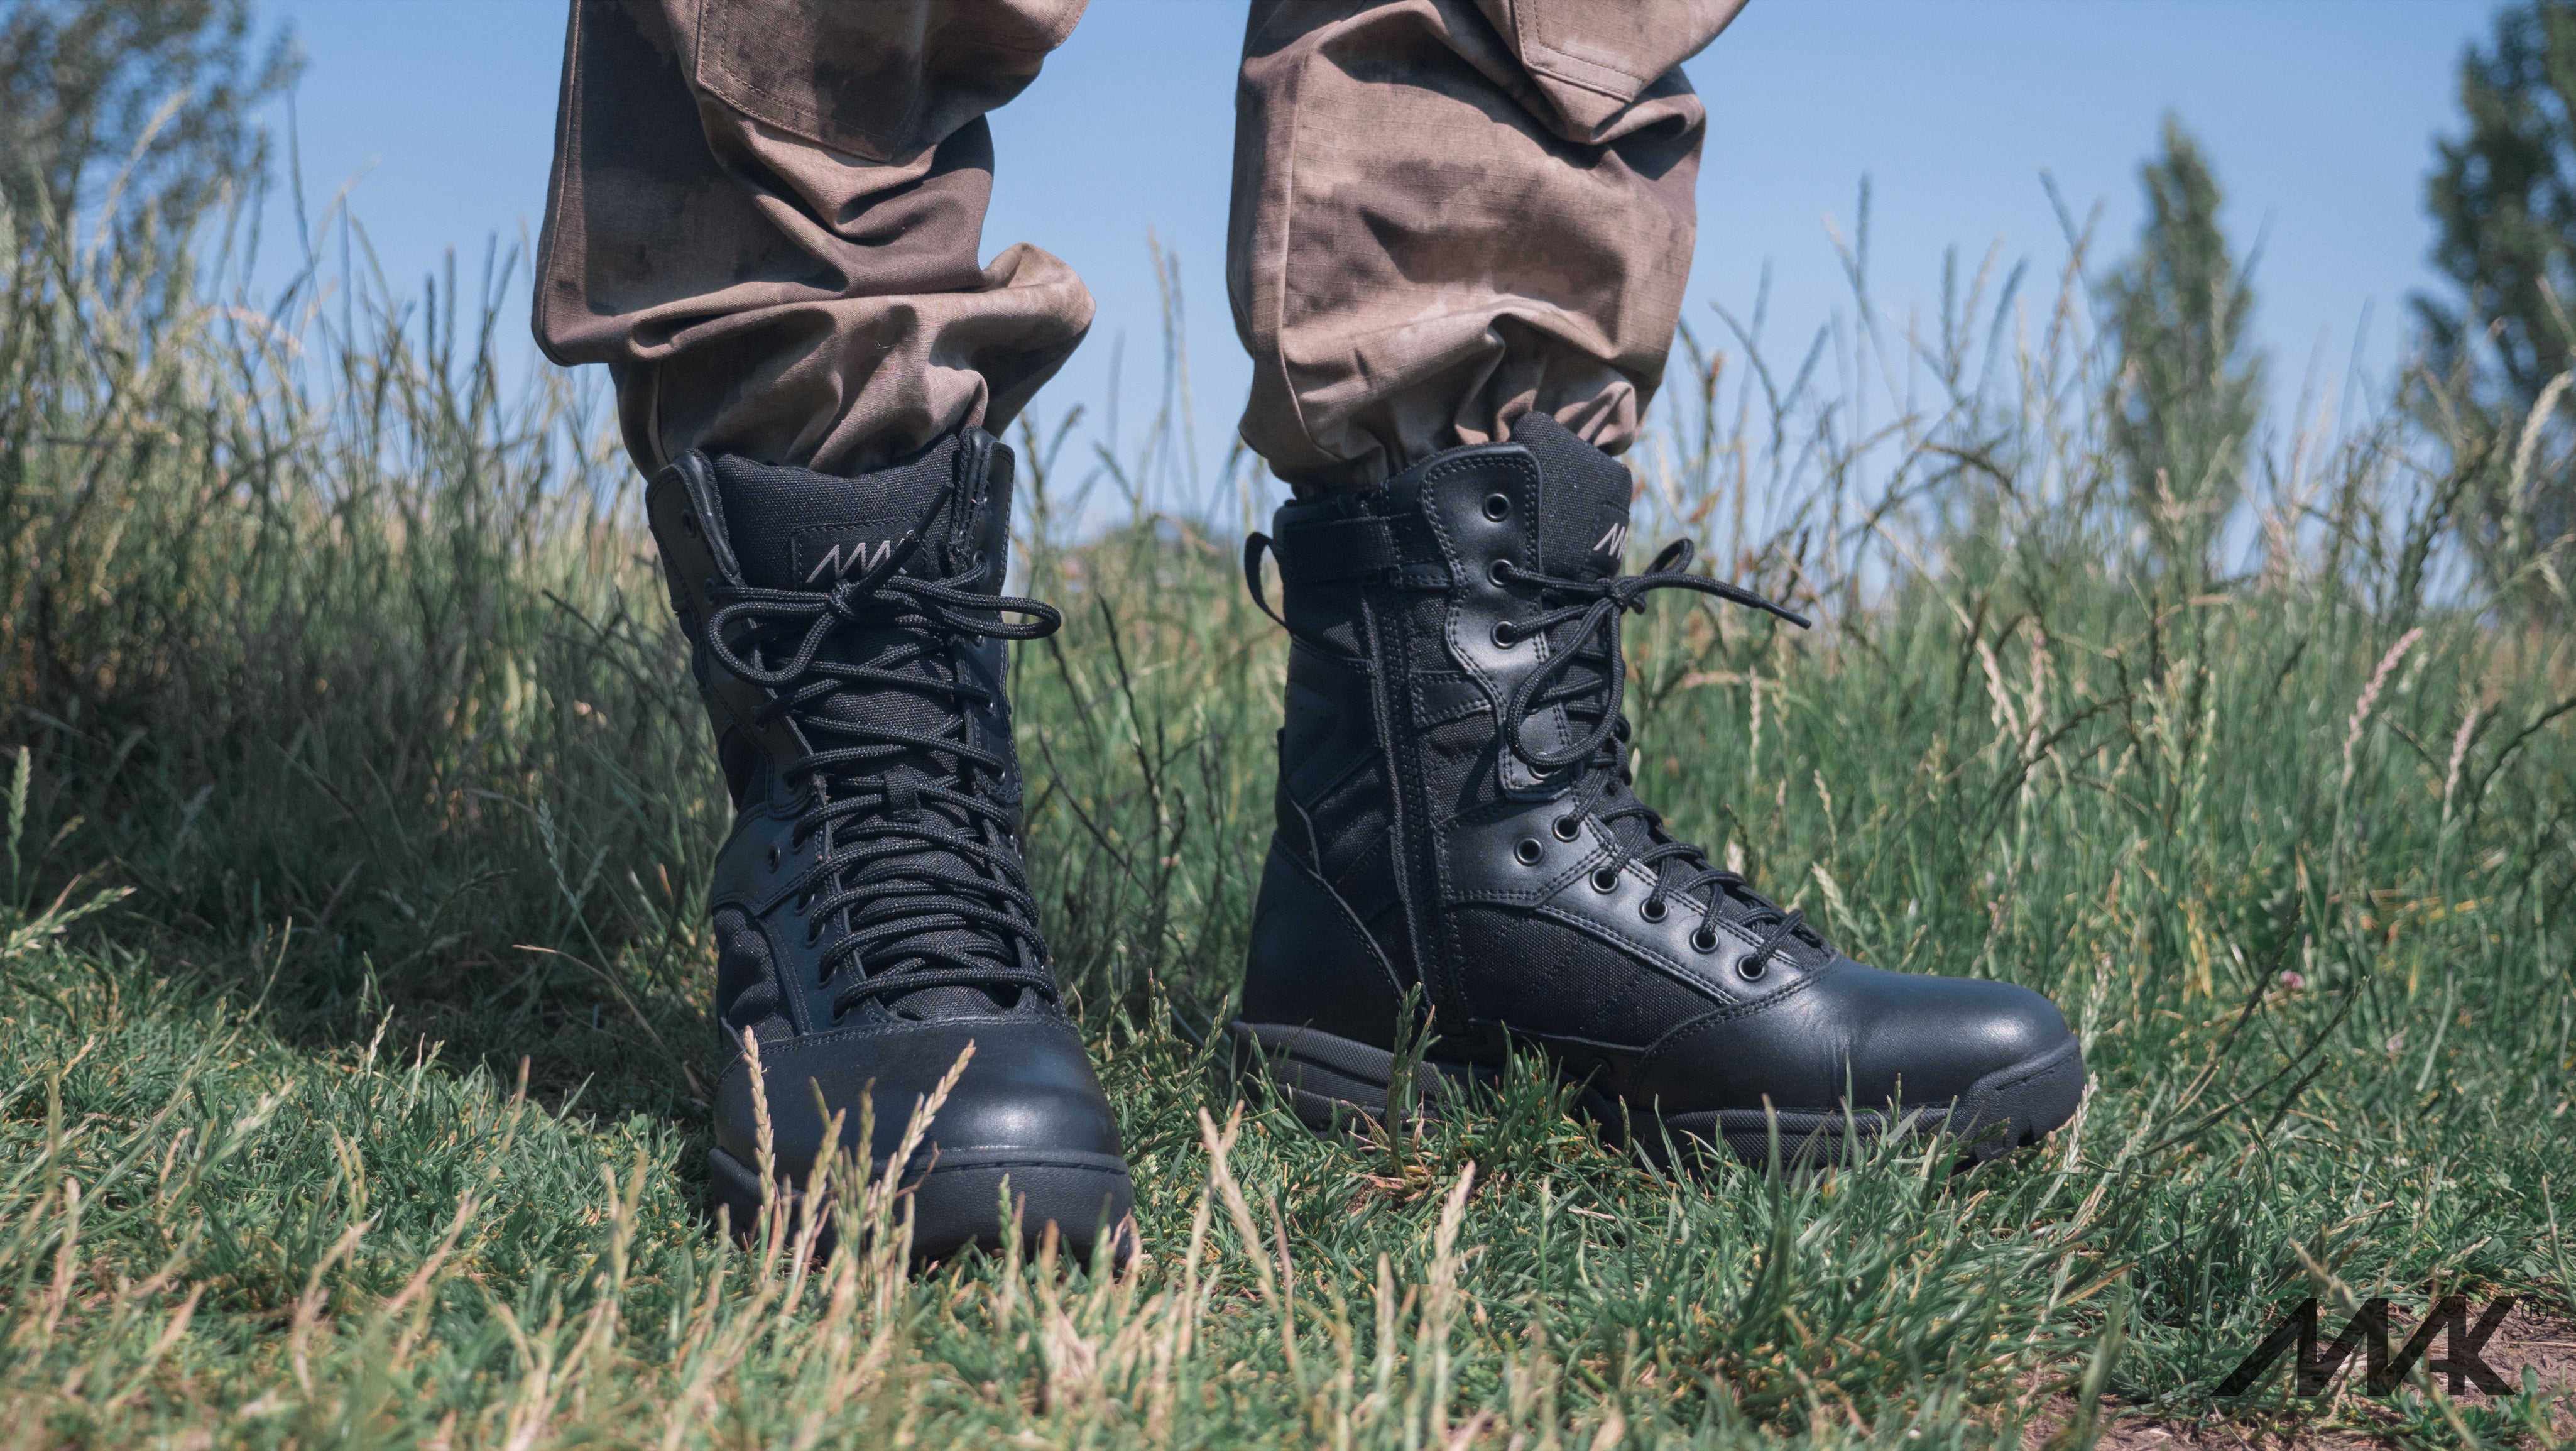 black leather military boot in black leather in grass